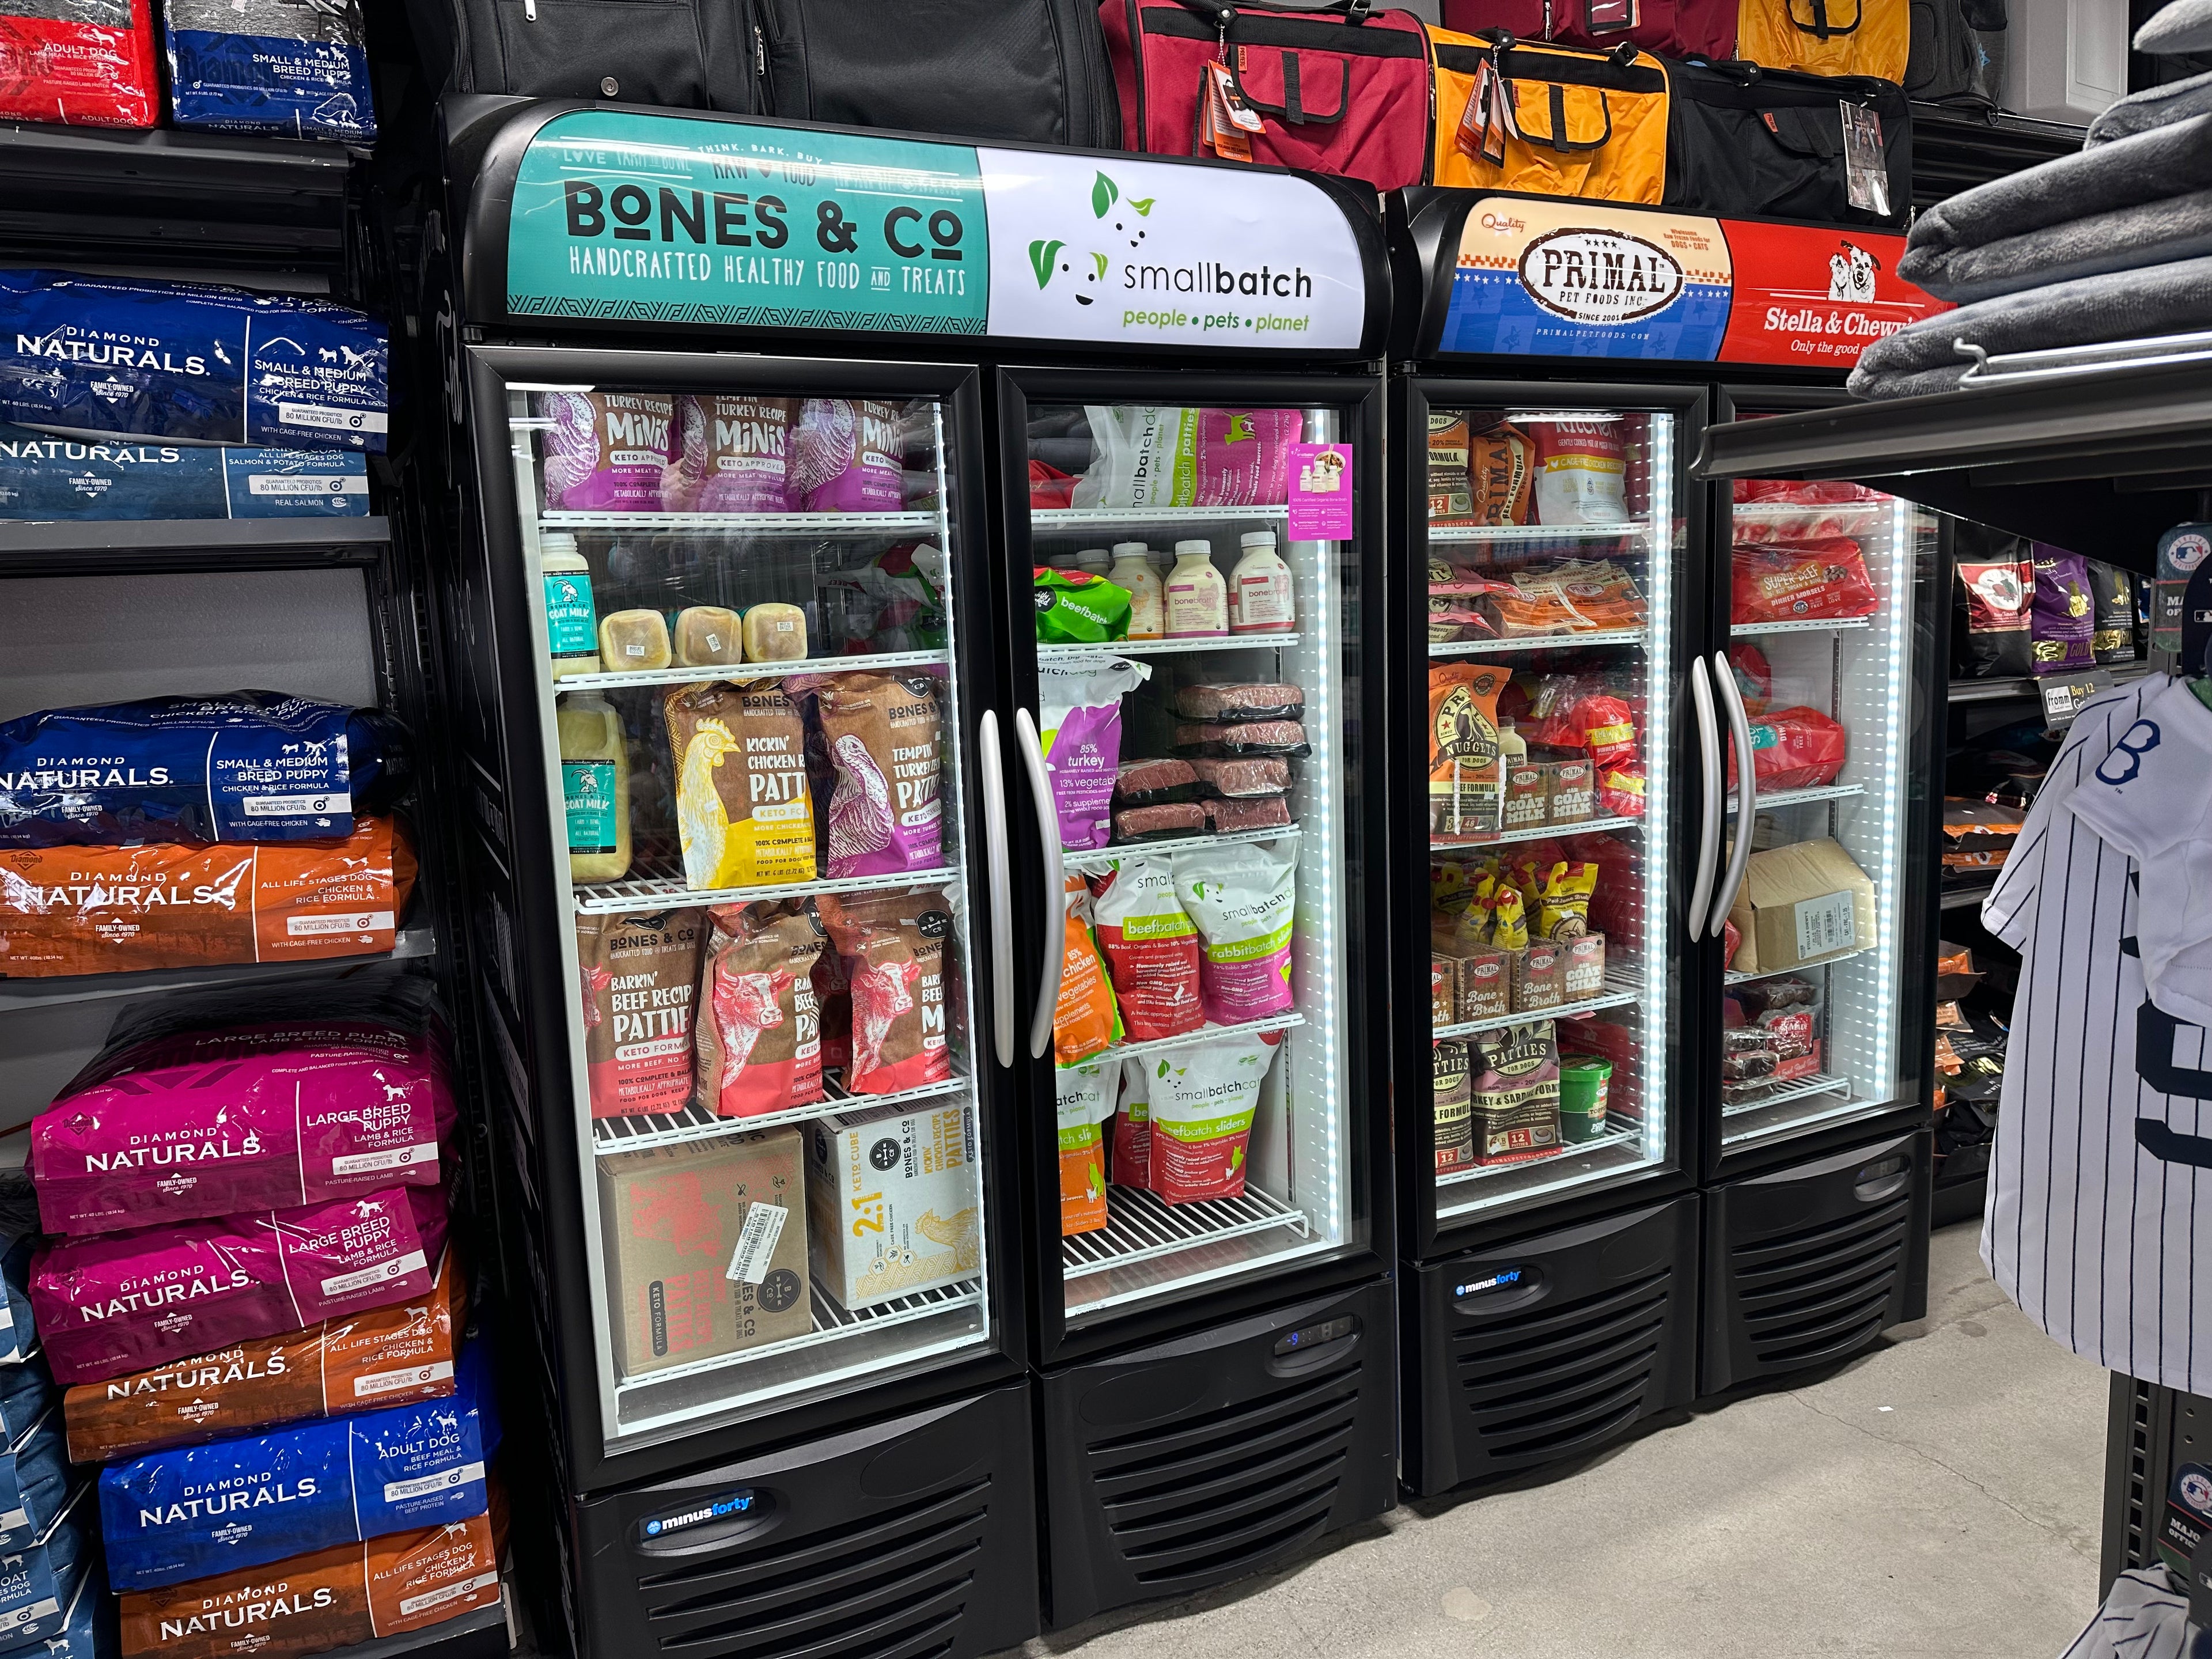 Refrigerated food and treats